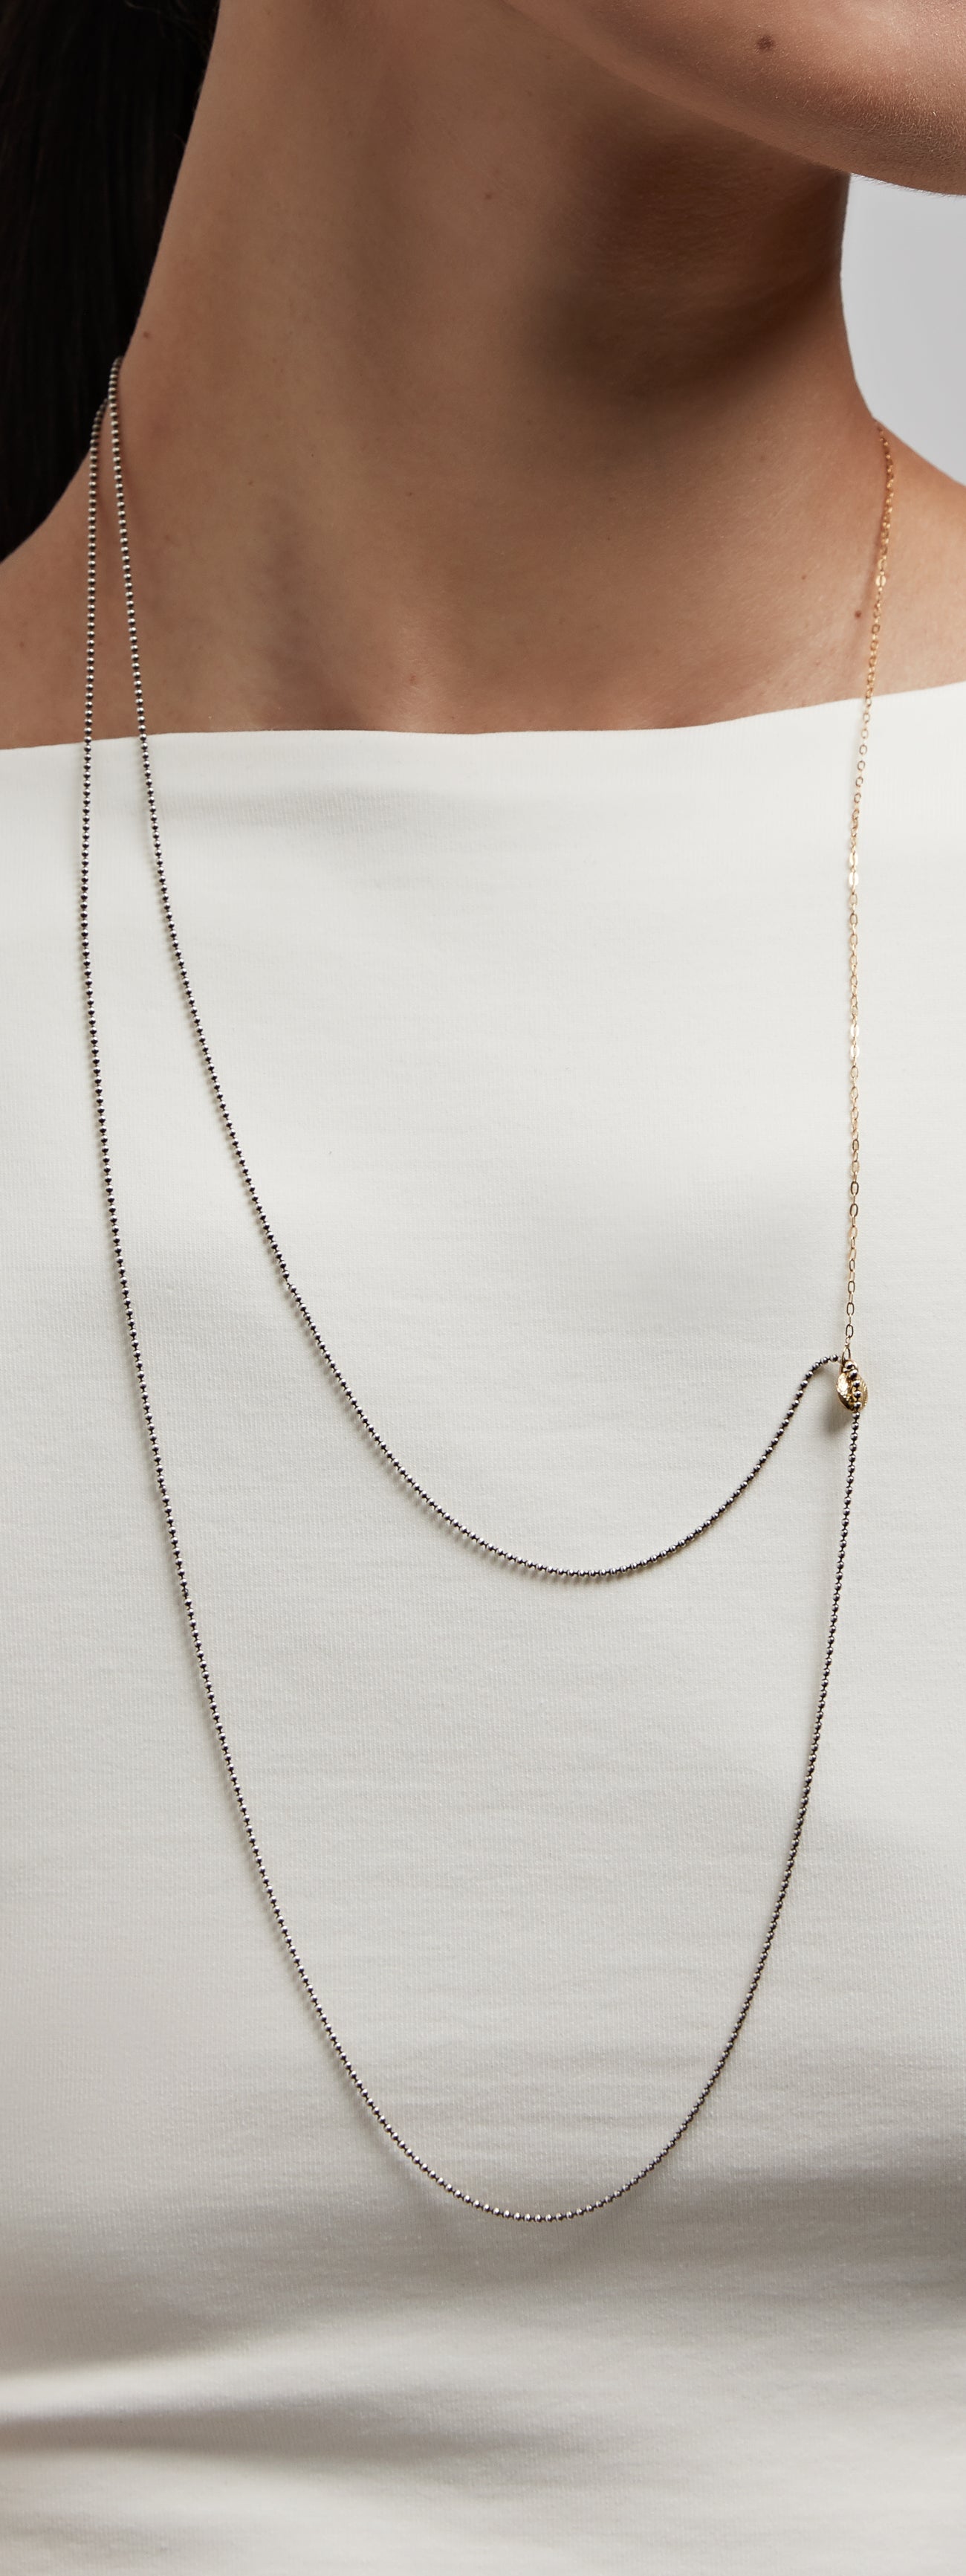 MIXED METAL NECKLACE 003